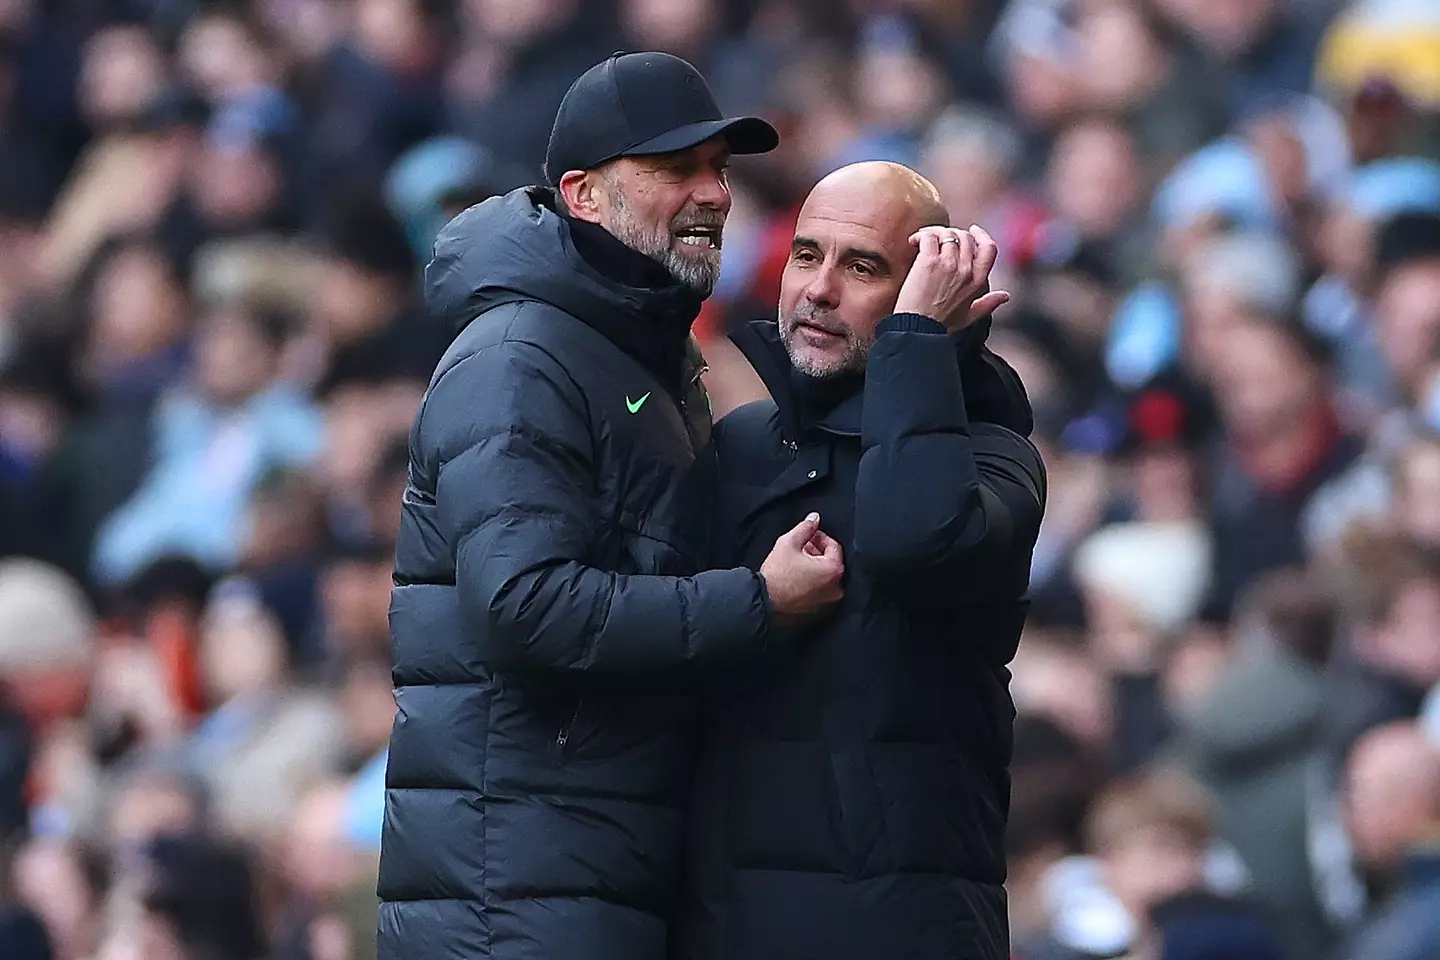 Klopp and Guardiola constantly push one another. (Image